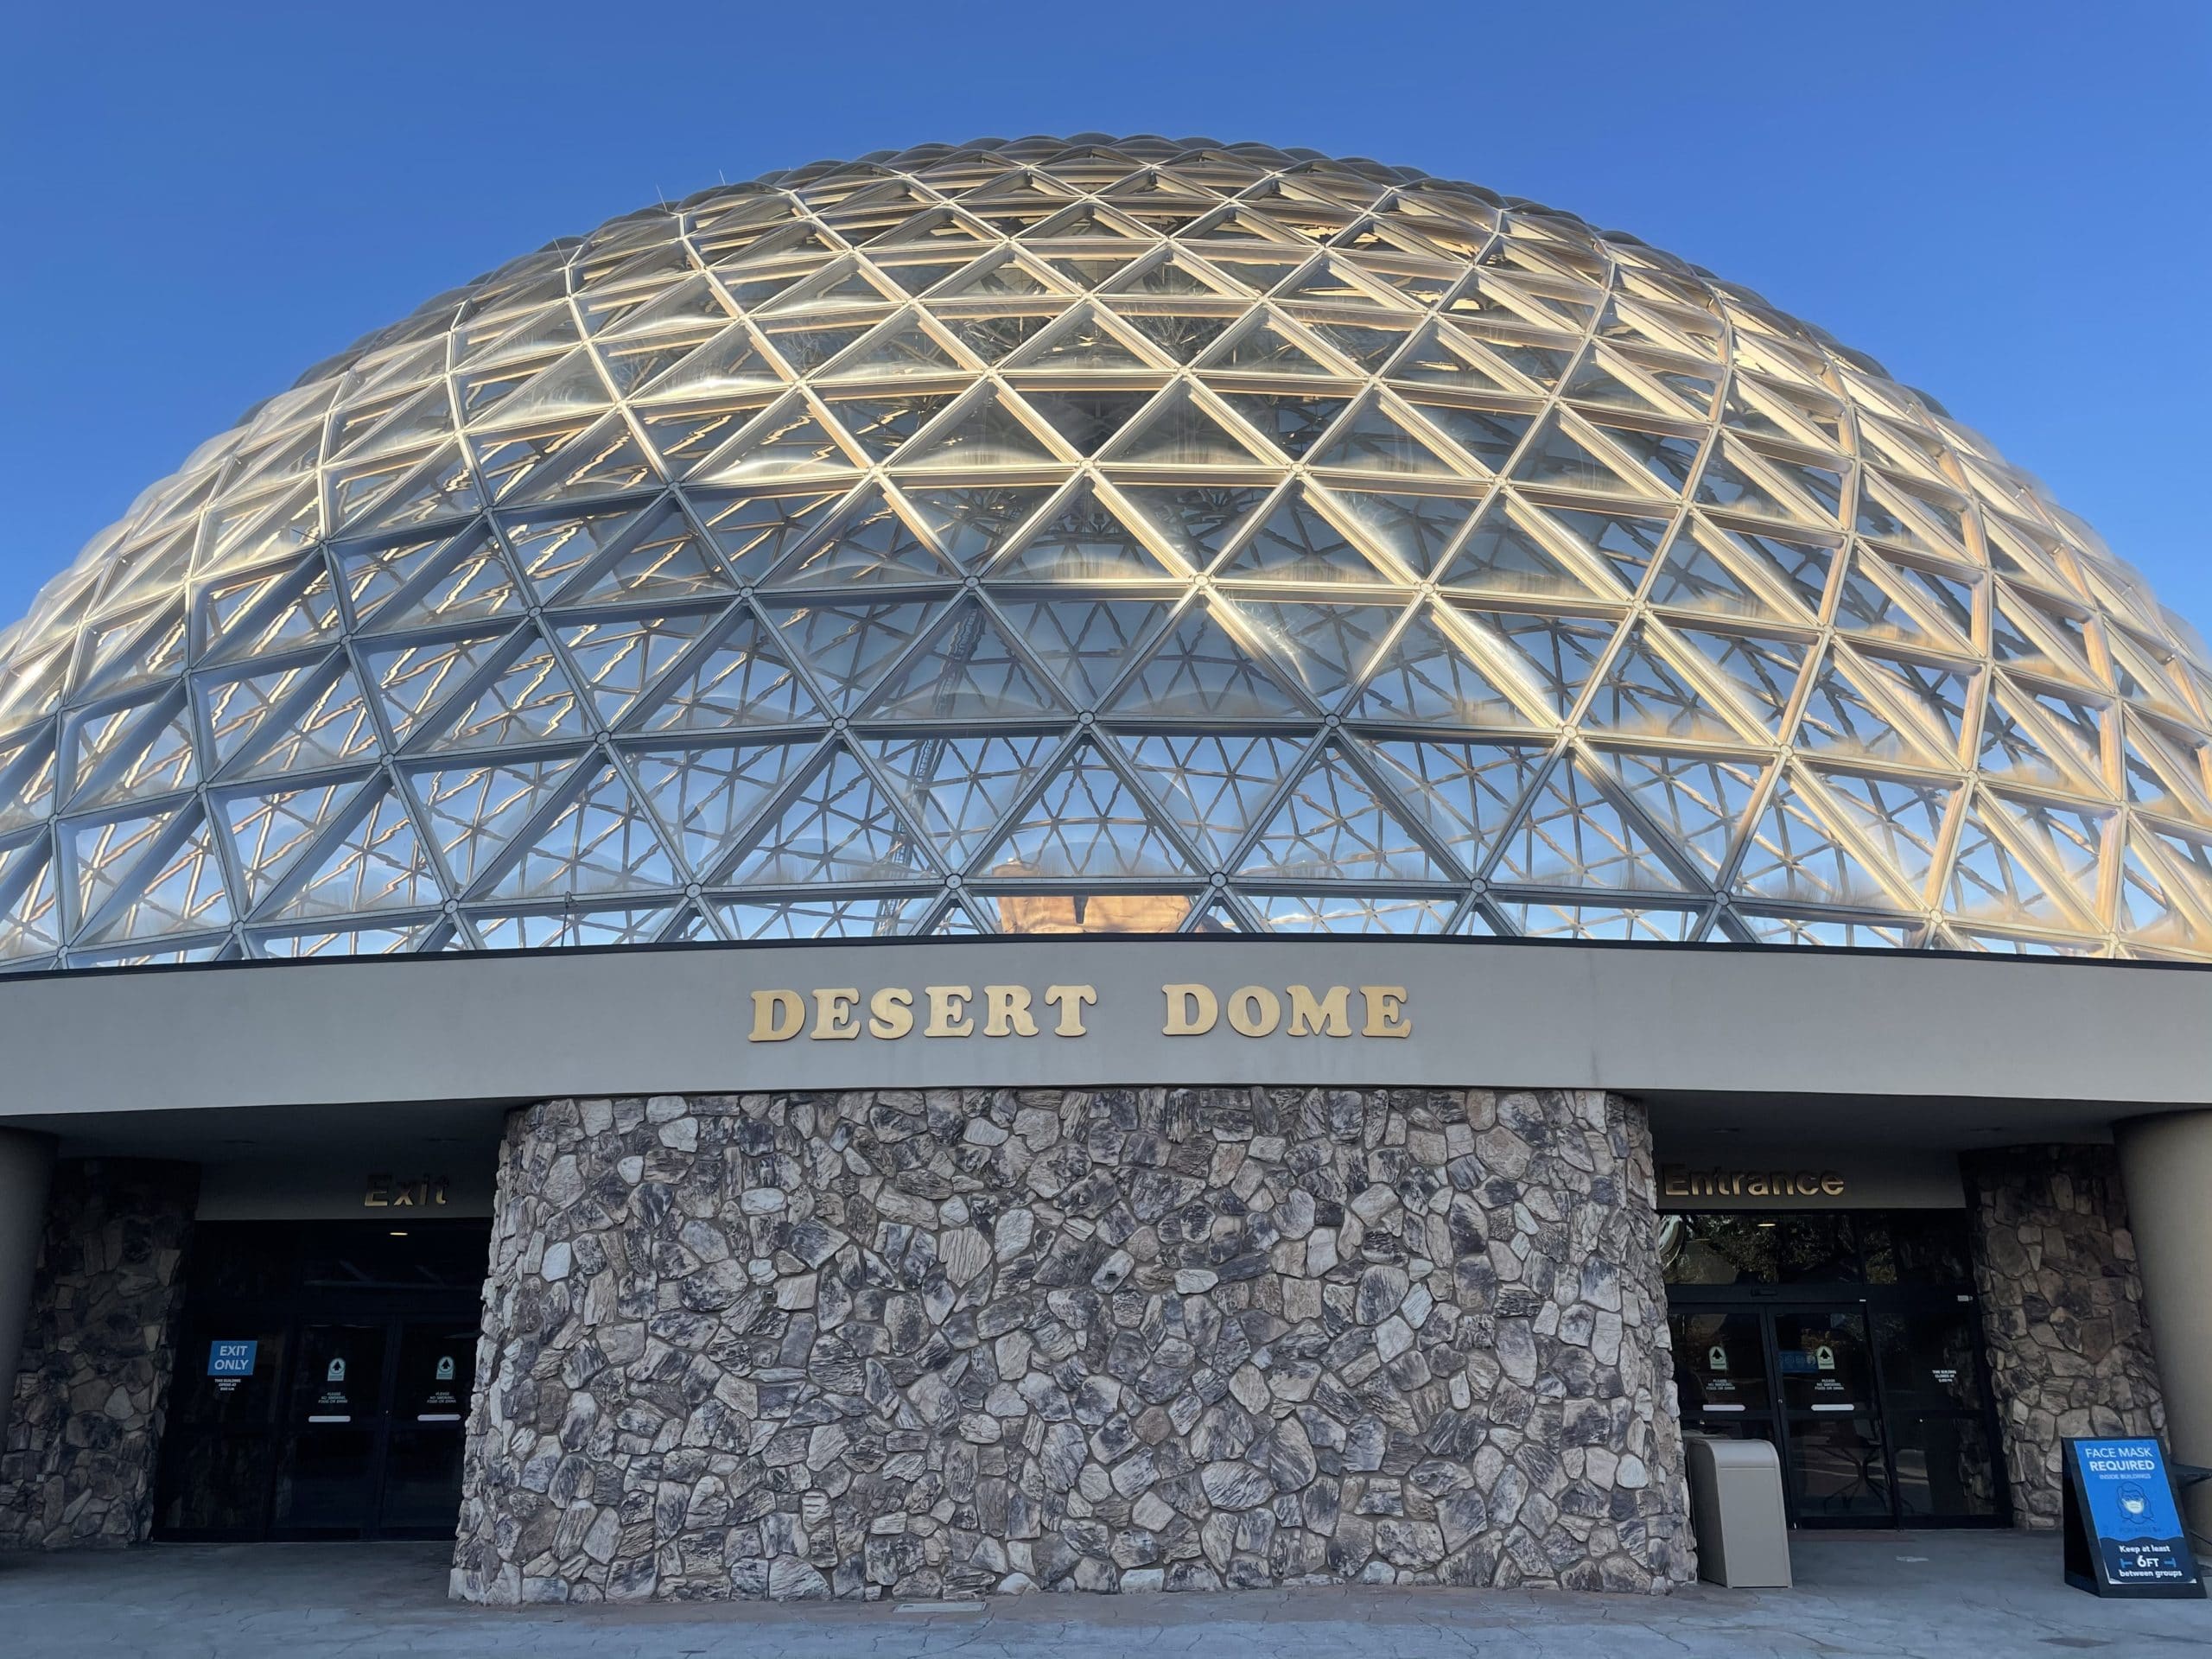 The geodesic desert dome called the "Desert Dome," which is printed on the front of the building. 